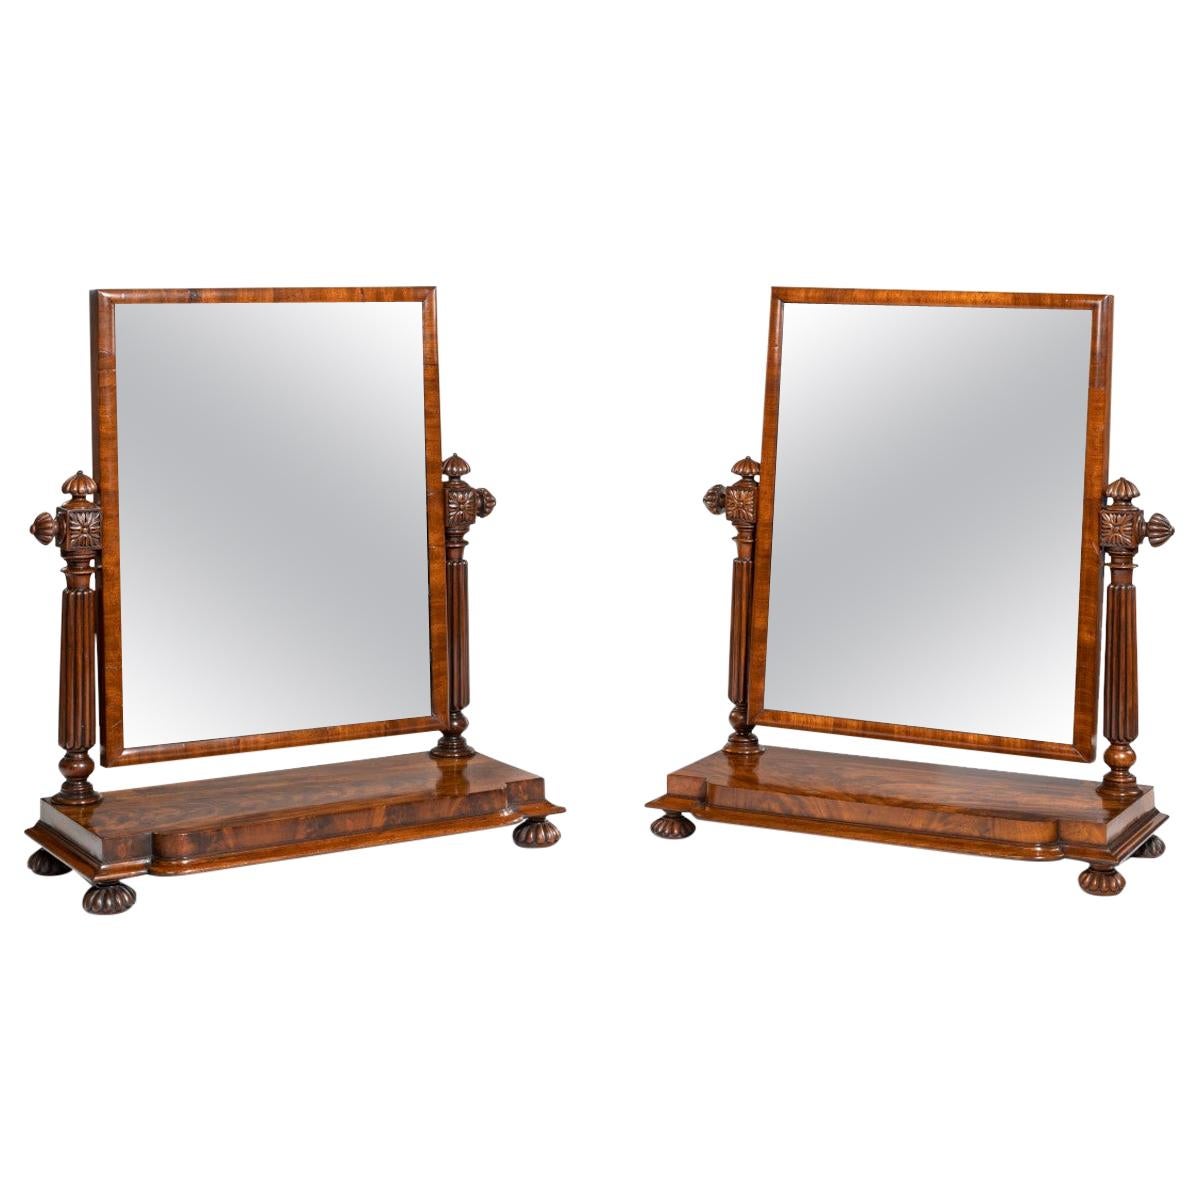 Pair of George IV Mahogany Table Mirrors Attributed to Gillows